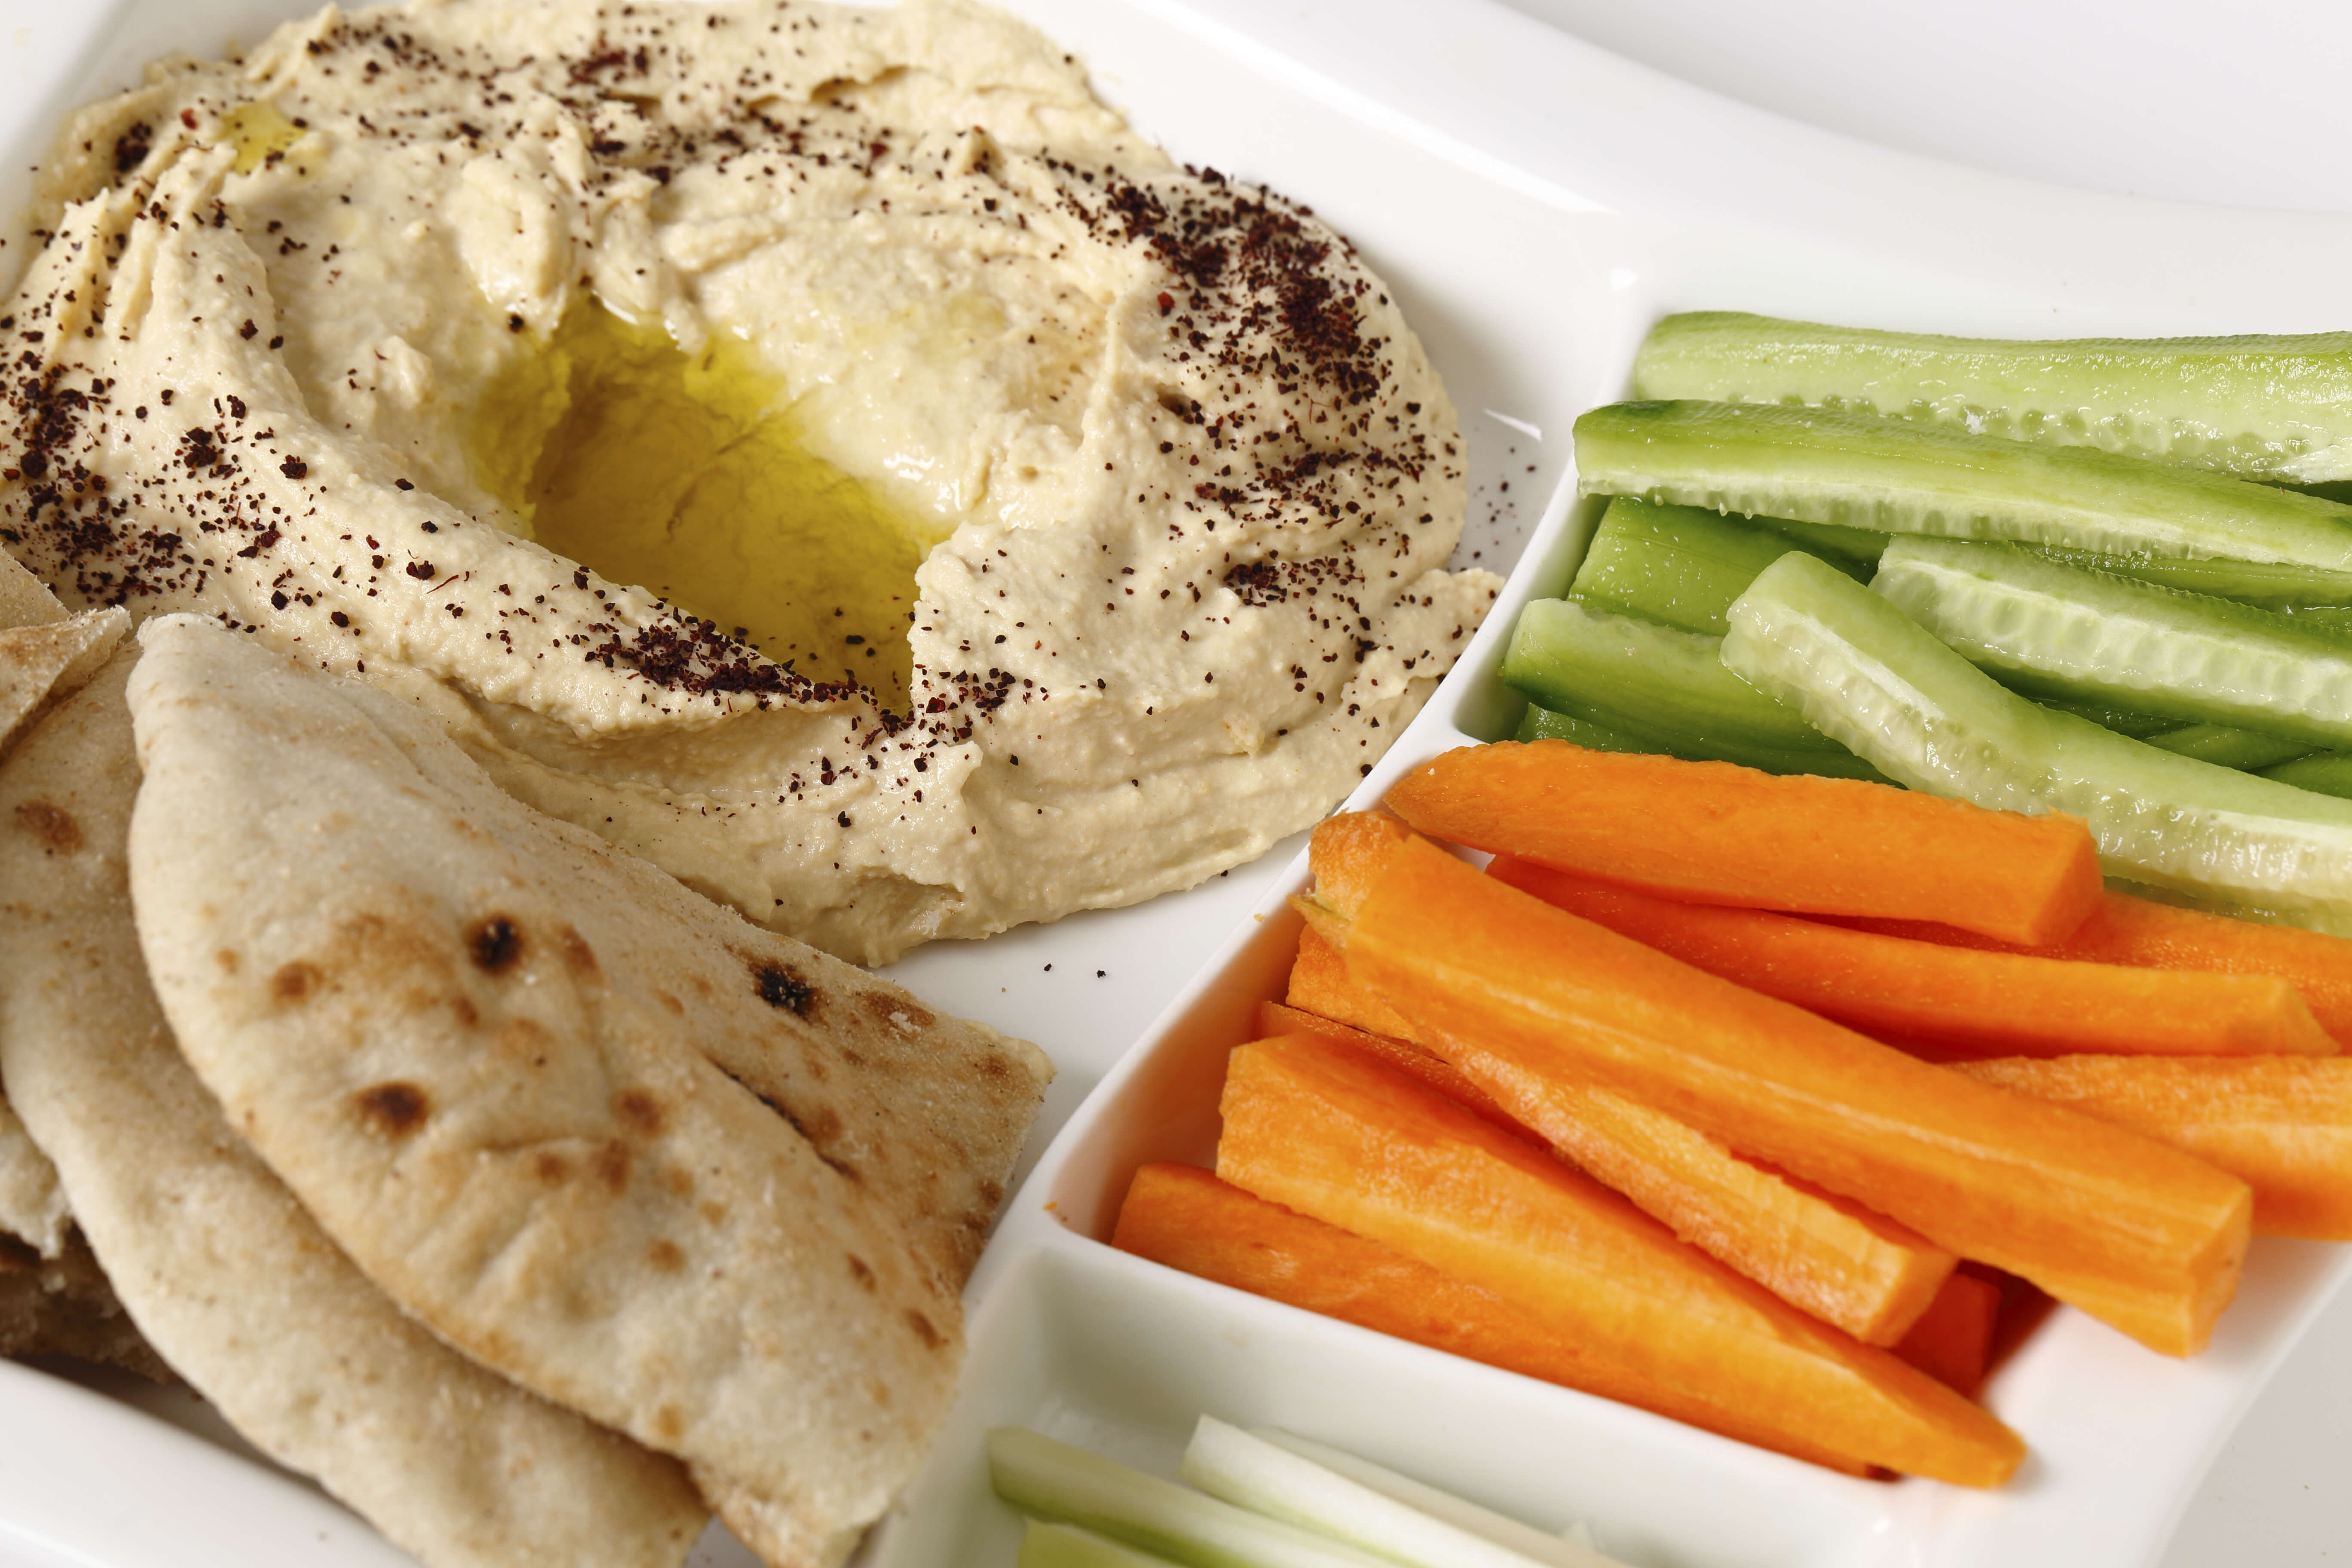 Hummus is a great healthy snack, appetizer or spread.